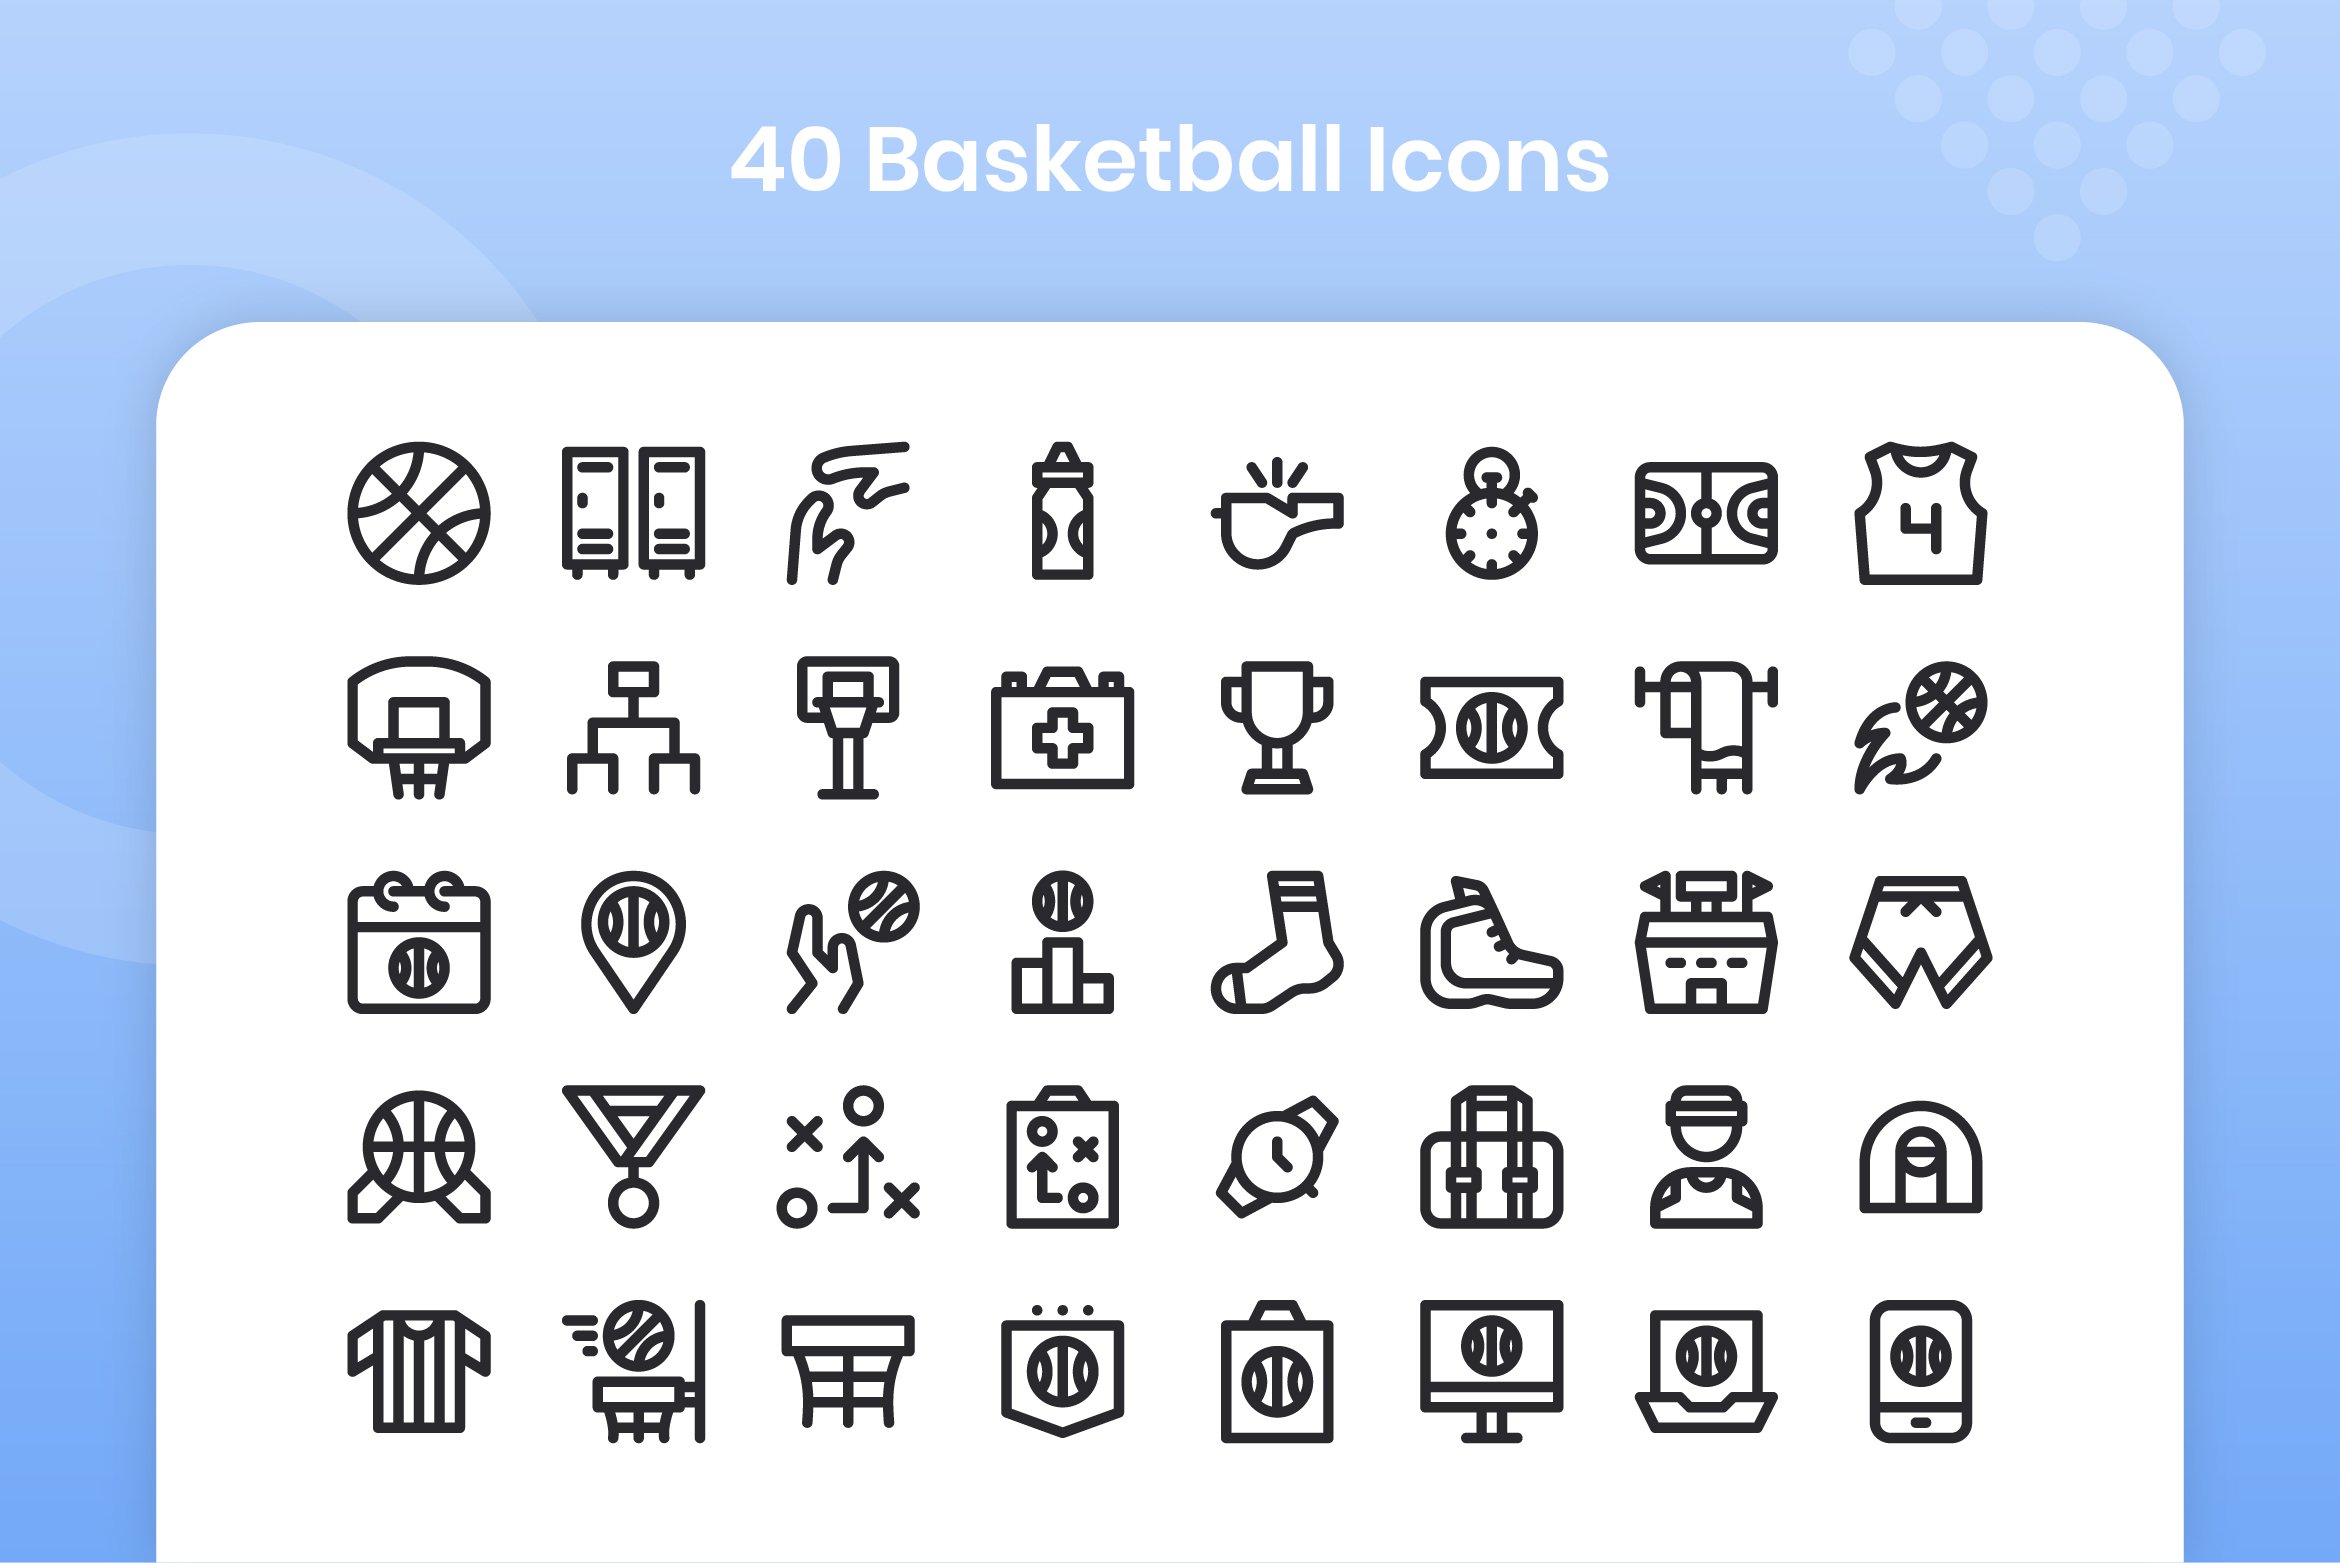 40 Basketball - Line preview image.